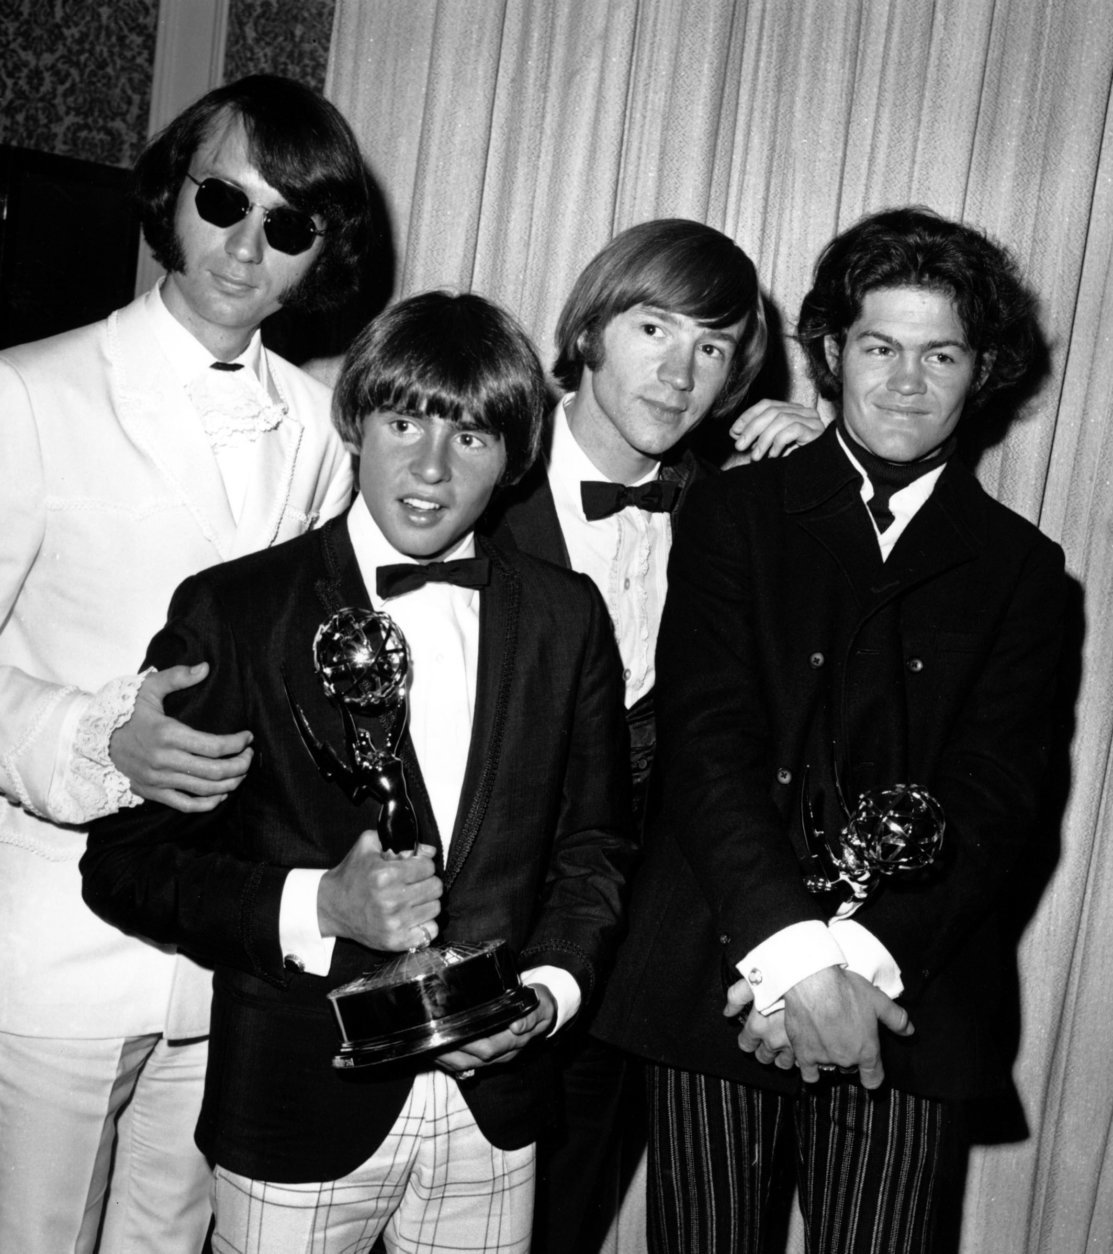 FILE - This June 4, 1967 file photo shows The Monkees posing with their Emmy award at the 19th Annual Primetime Emmy Awards in Calif. The group members are, from left to right, Mike Nesmith, Davy Jones, Peter Tork, and Micky Dolenz. Jones died Wednesday Feb. 29, 2012 in Florida. He was 66. Jones rose to fame in 1965 when he joined The Monkees, a British popular rock group formed for a television show. Jones sang lead vocals on songs like "I Wanna Be Free" and "Daydream Believer."     (AP Photo, File)